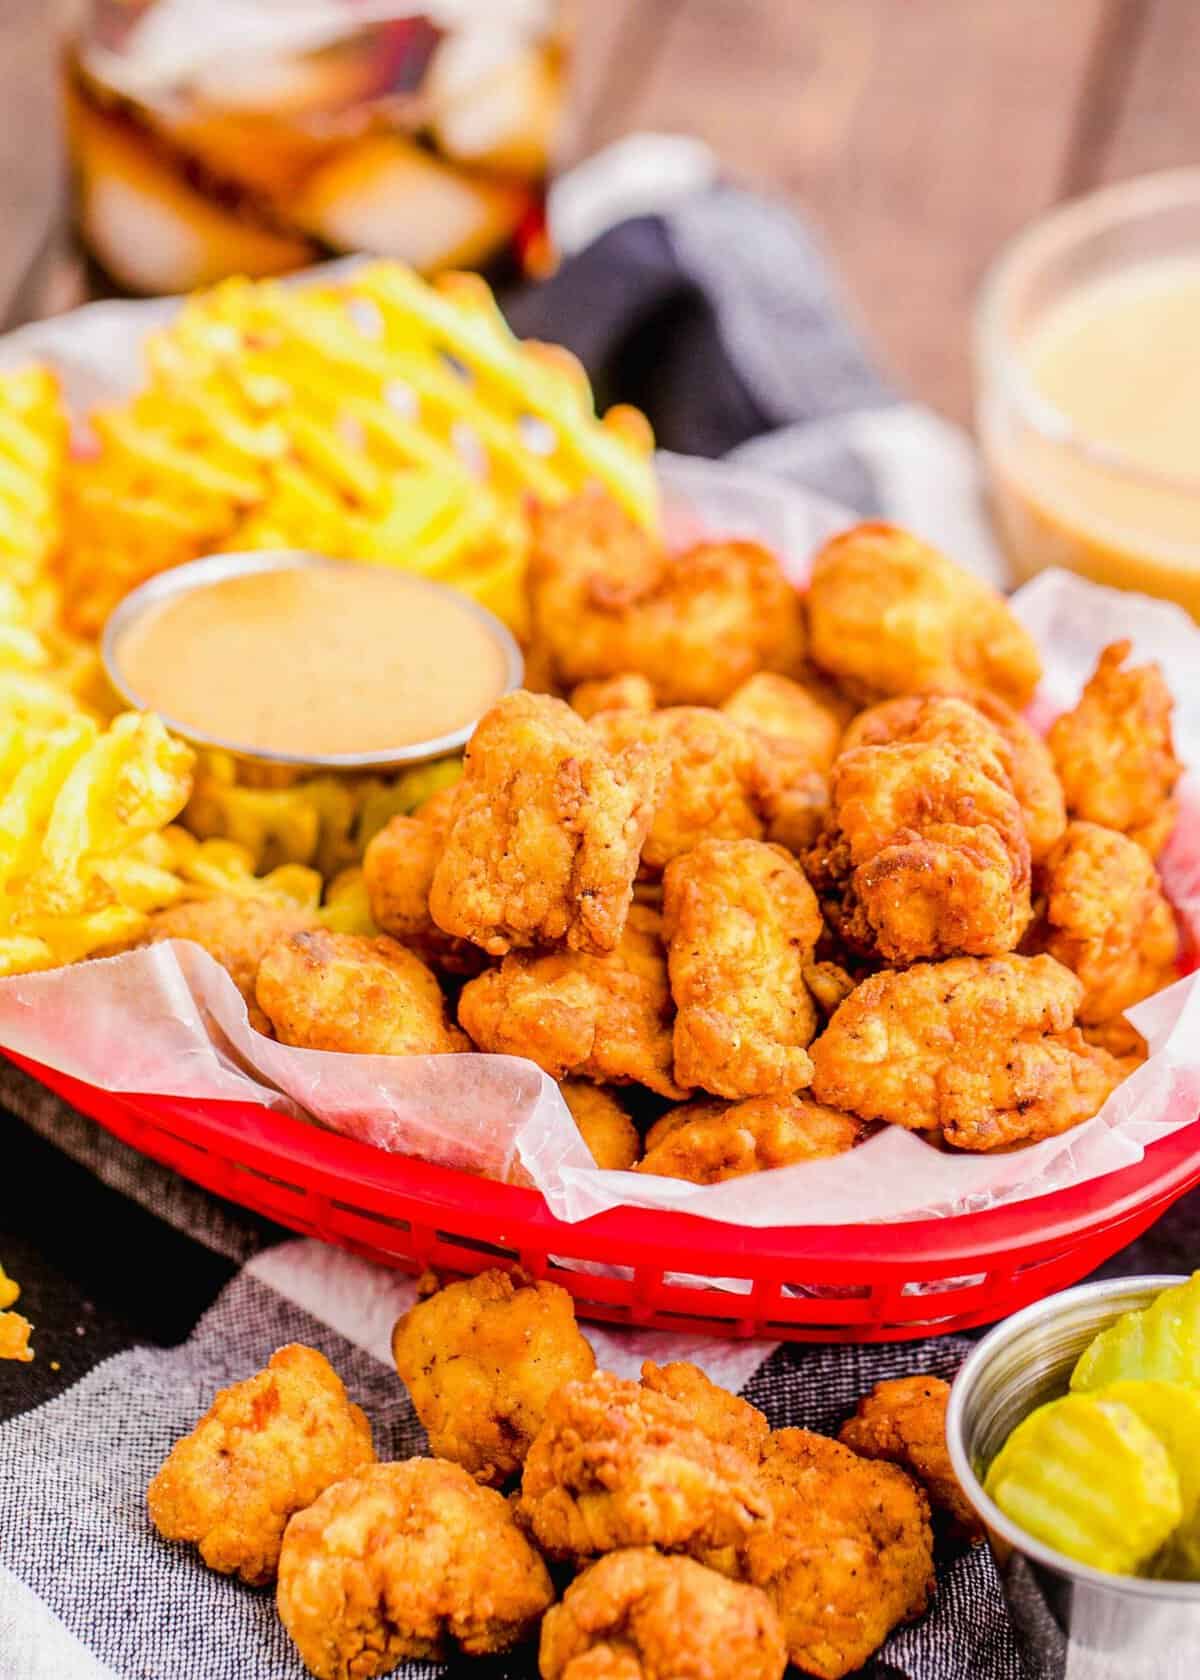 Chicken nuggets in basket with dipping sauce and waffle fries